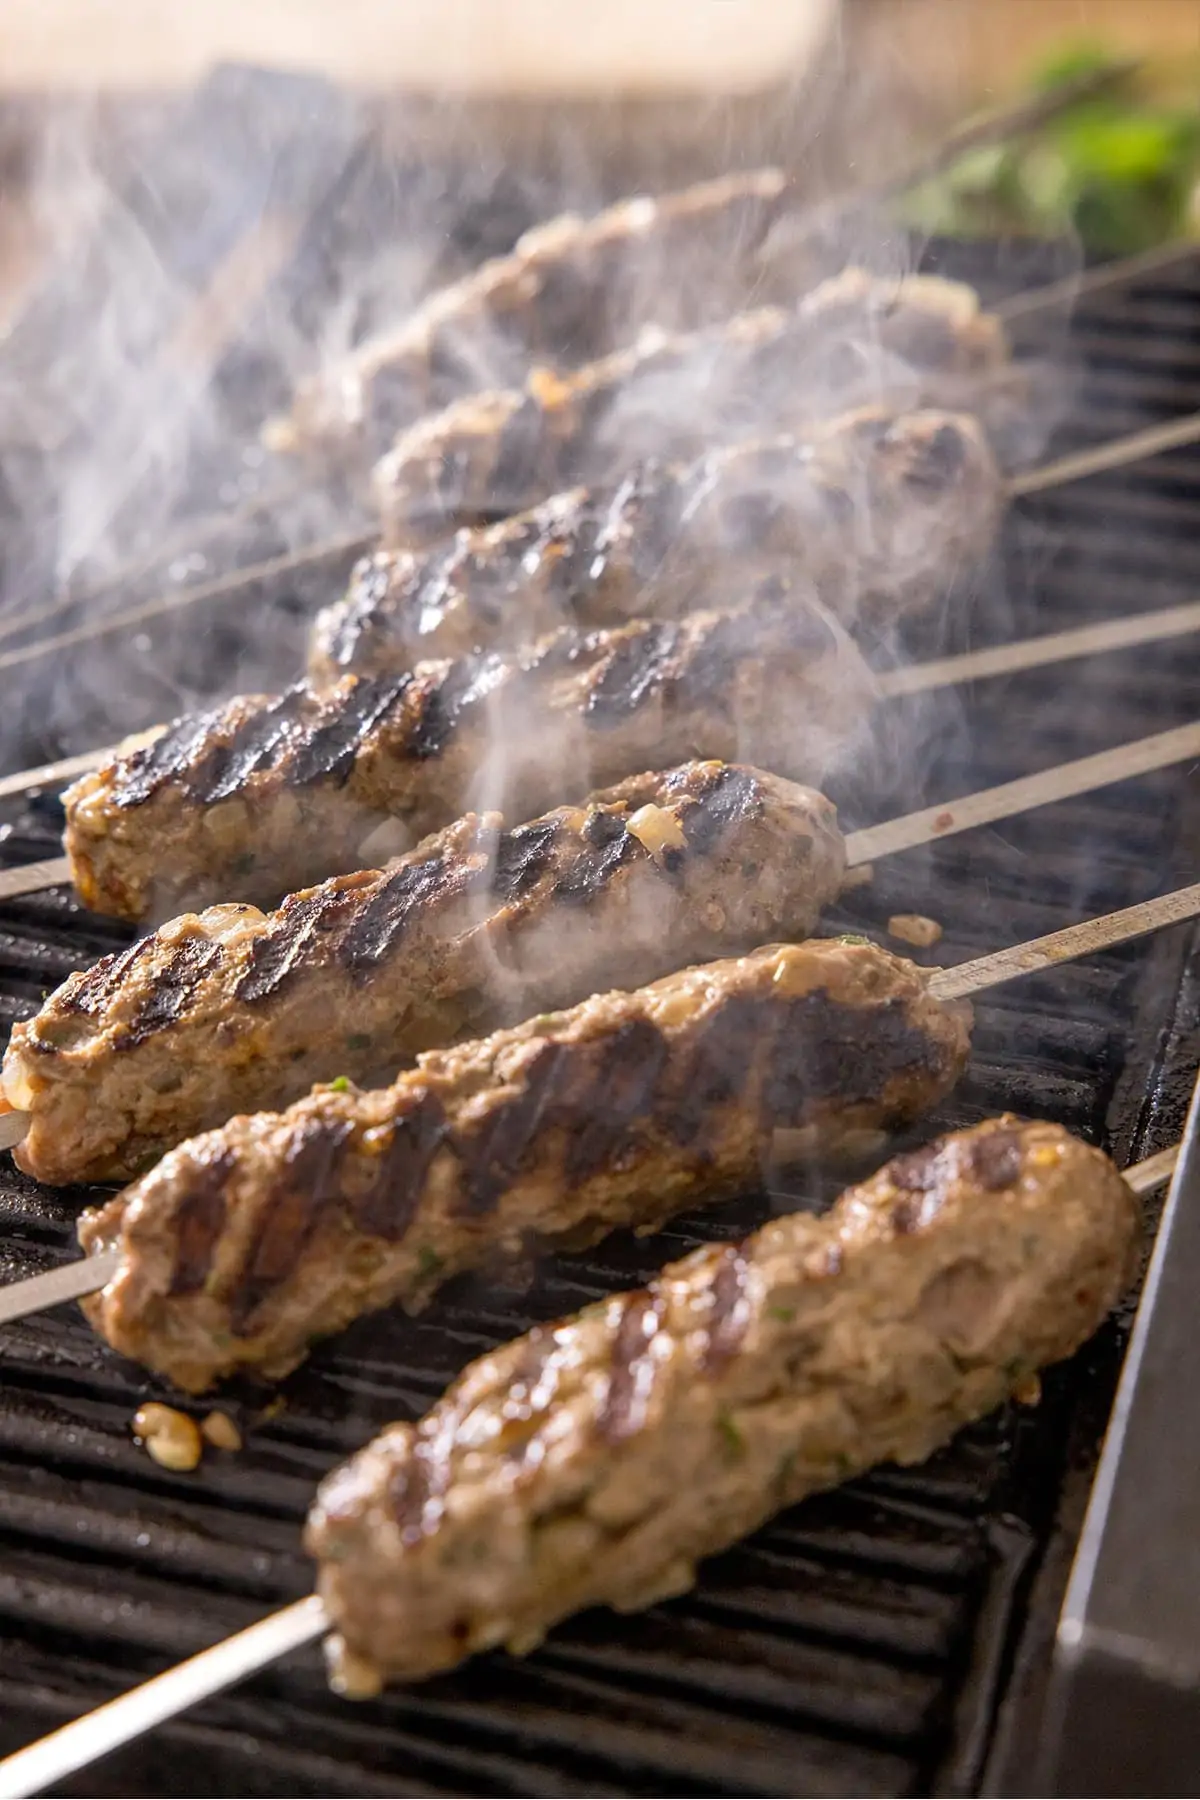 Lamb koftas being cooked on a griddle with steam rising.